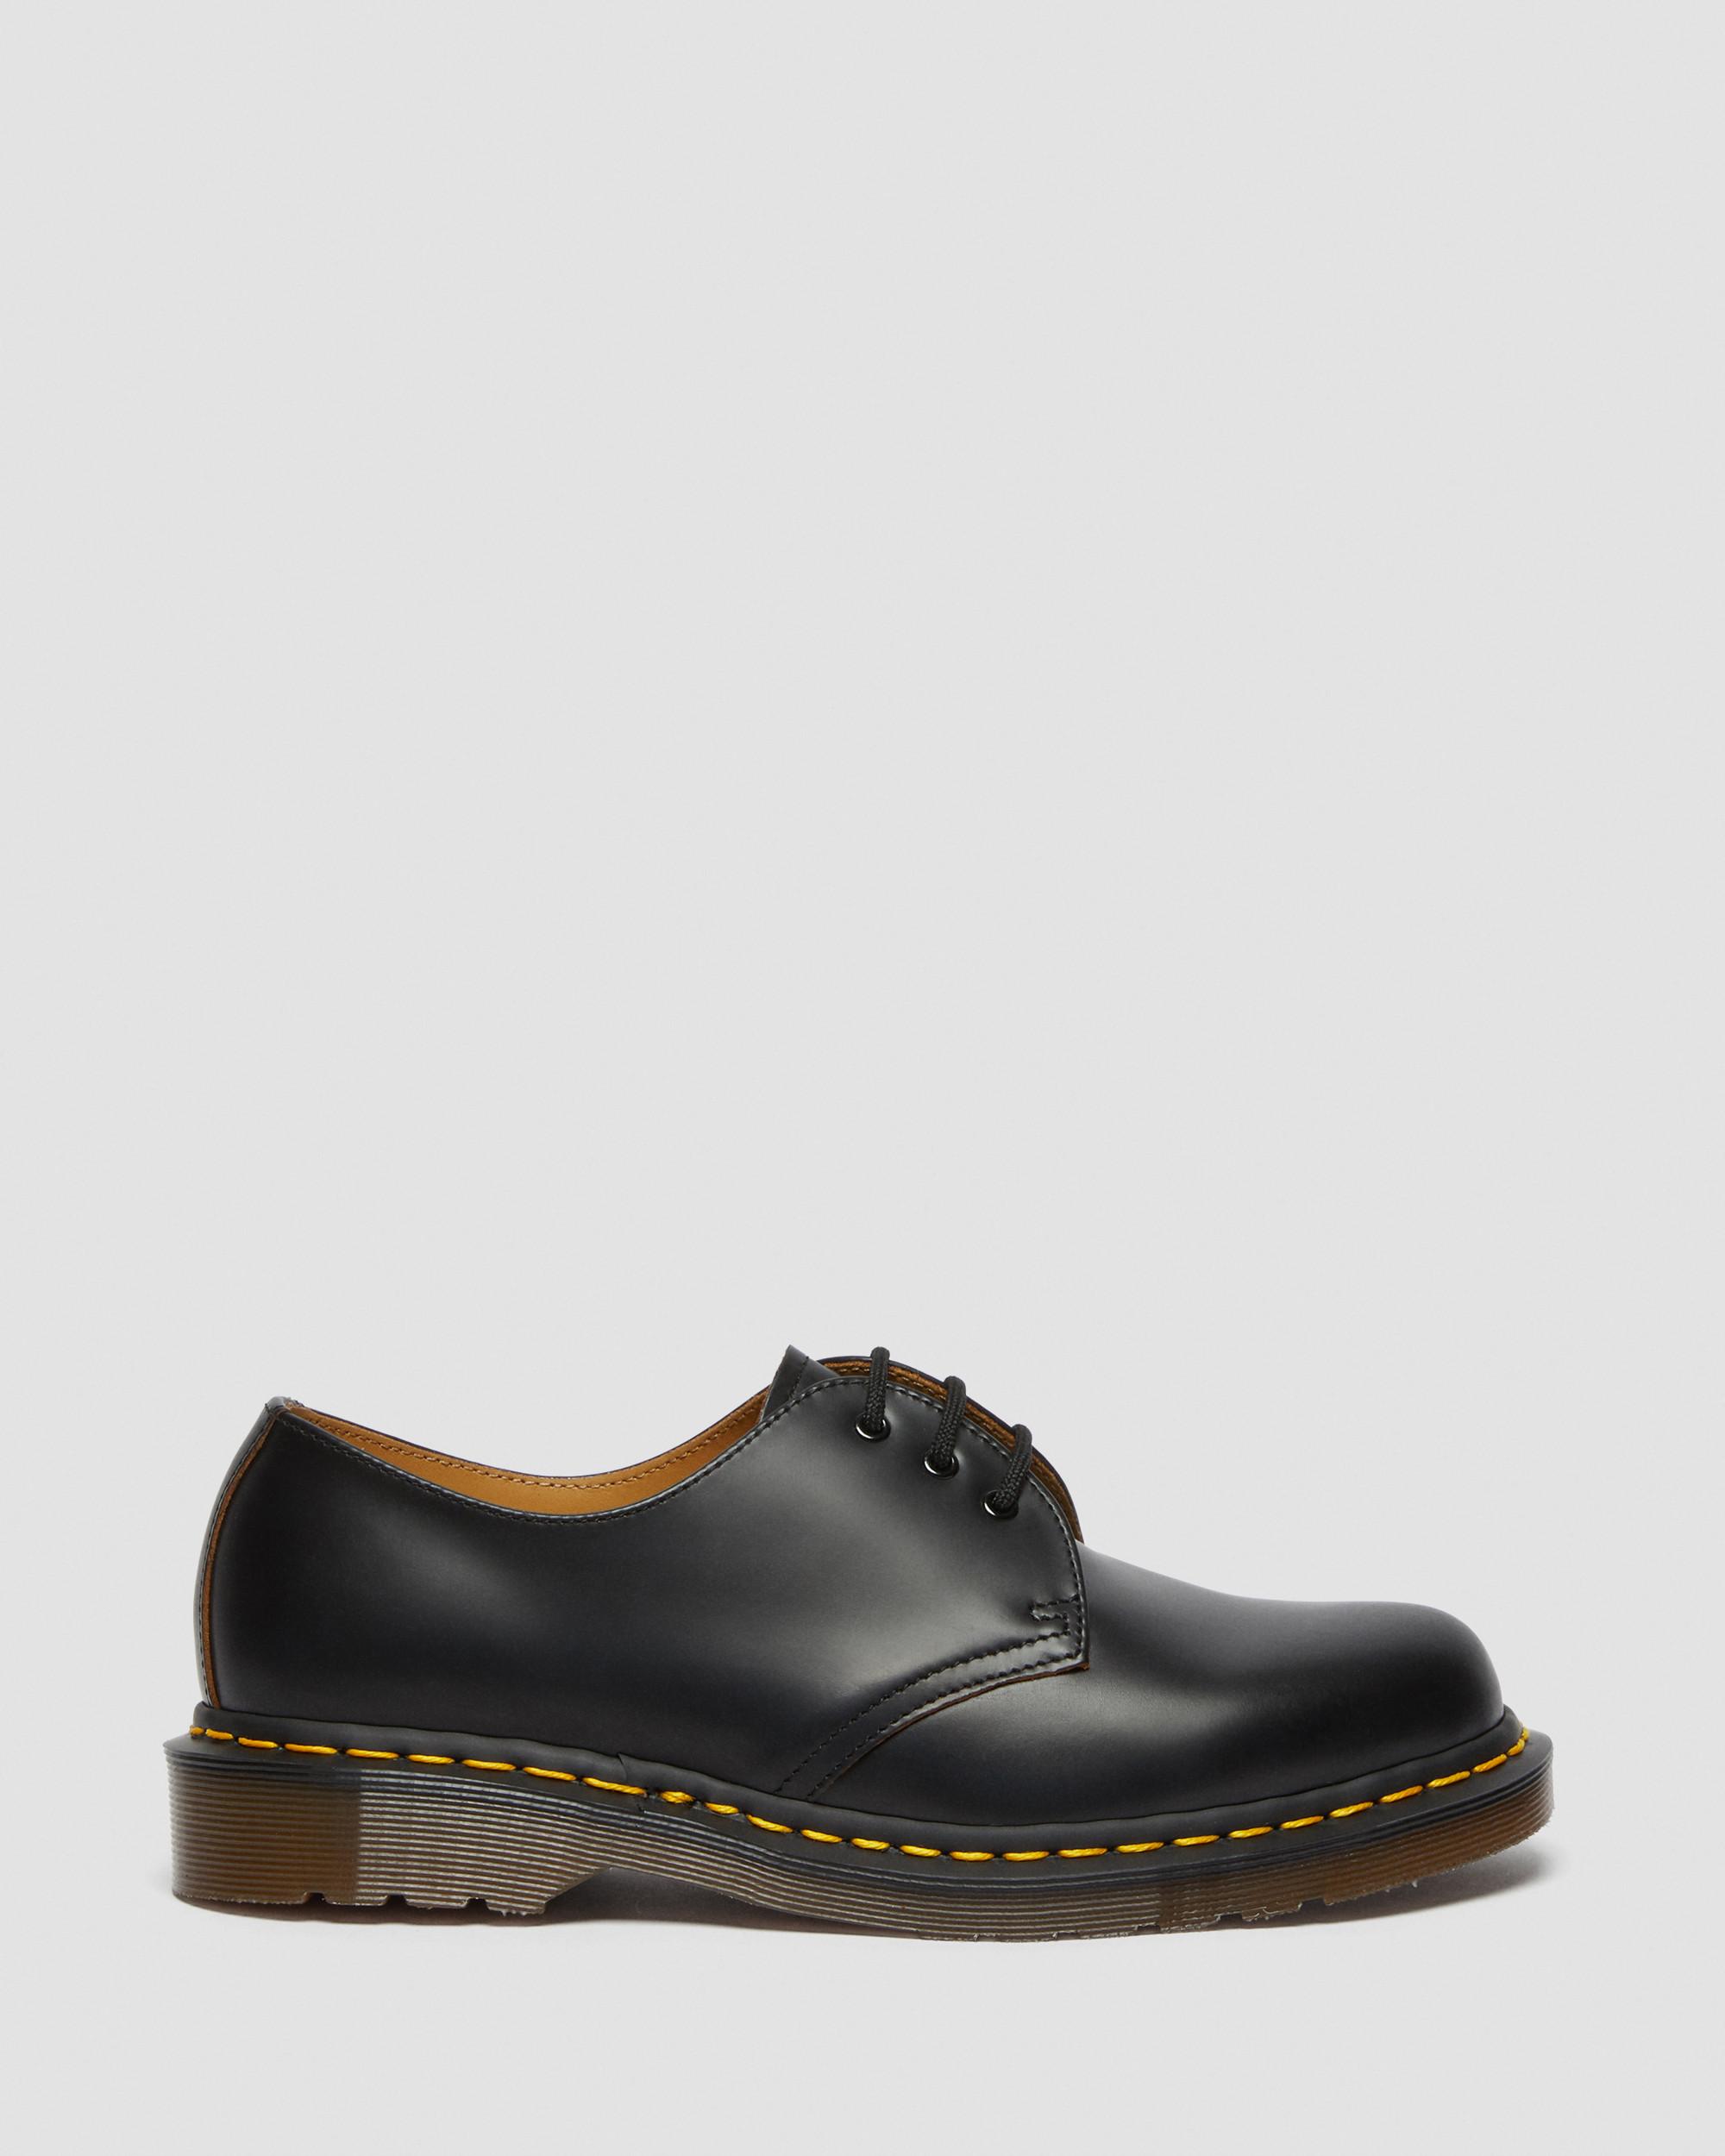 Vintage 1461 Quilon Leather Oxford Shoes in Black